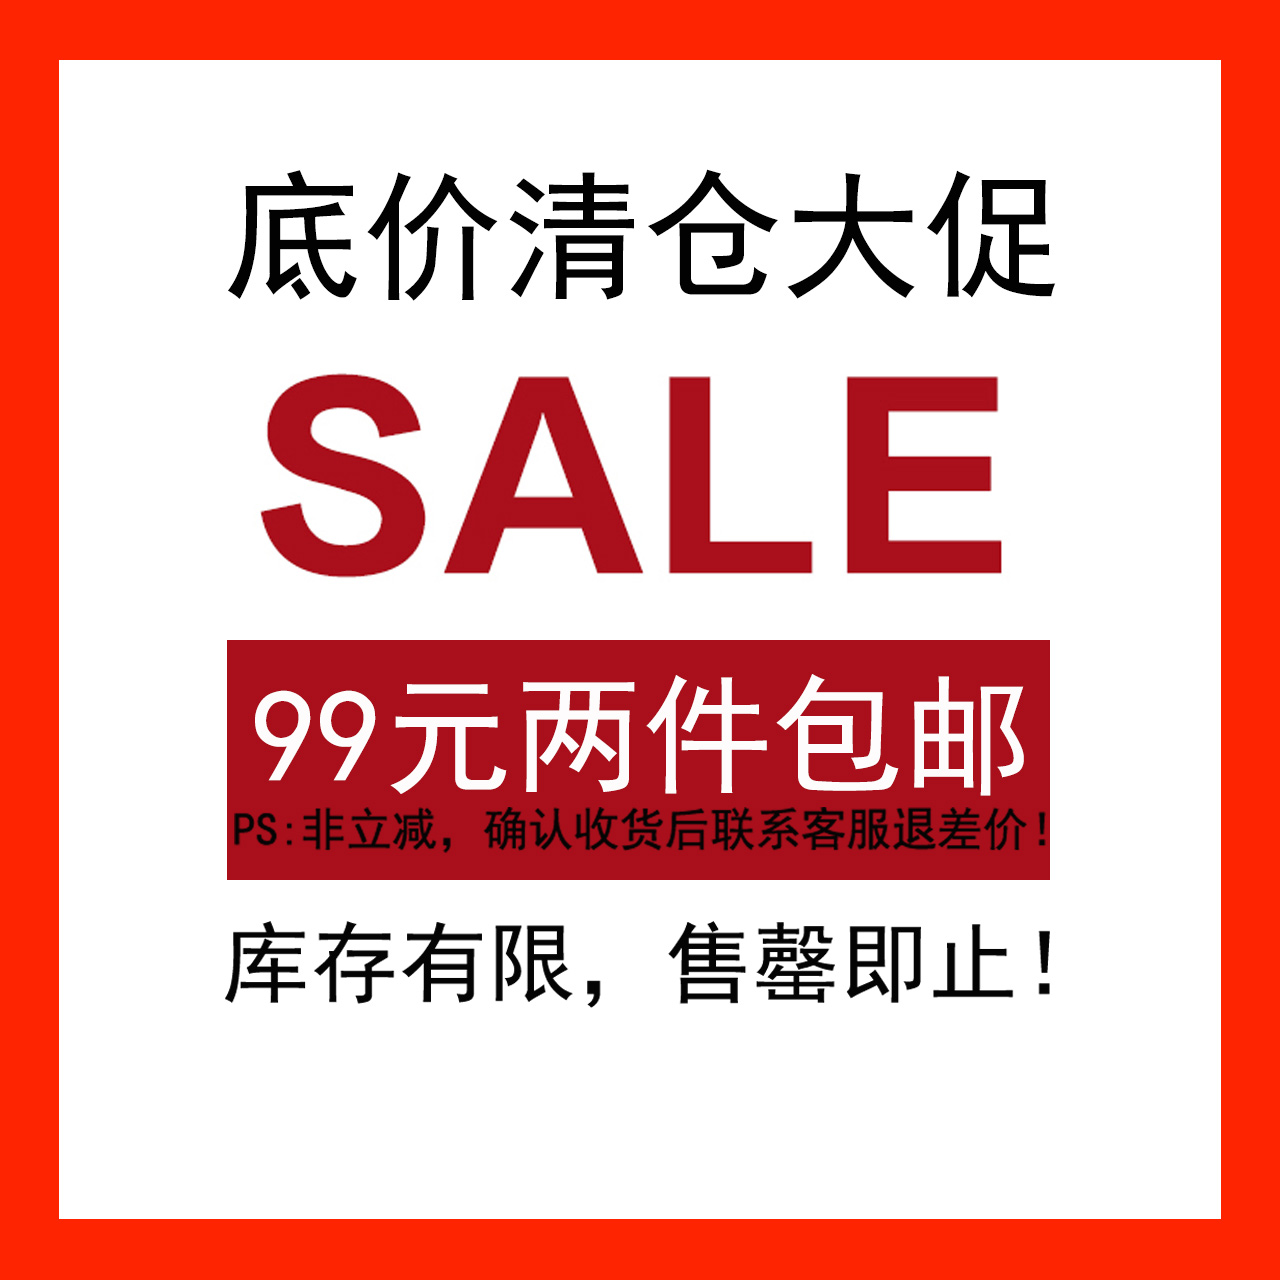 ArtmiARTMI's apparel brand derivative. Underpriced clearance of 99 yuan for two parcel posts